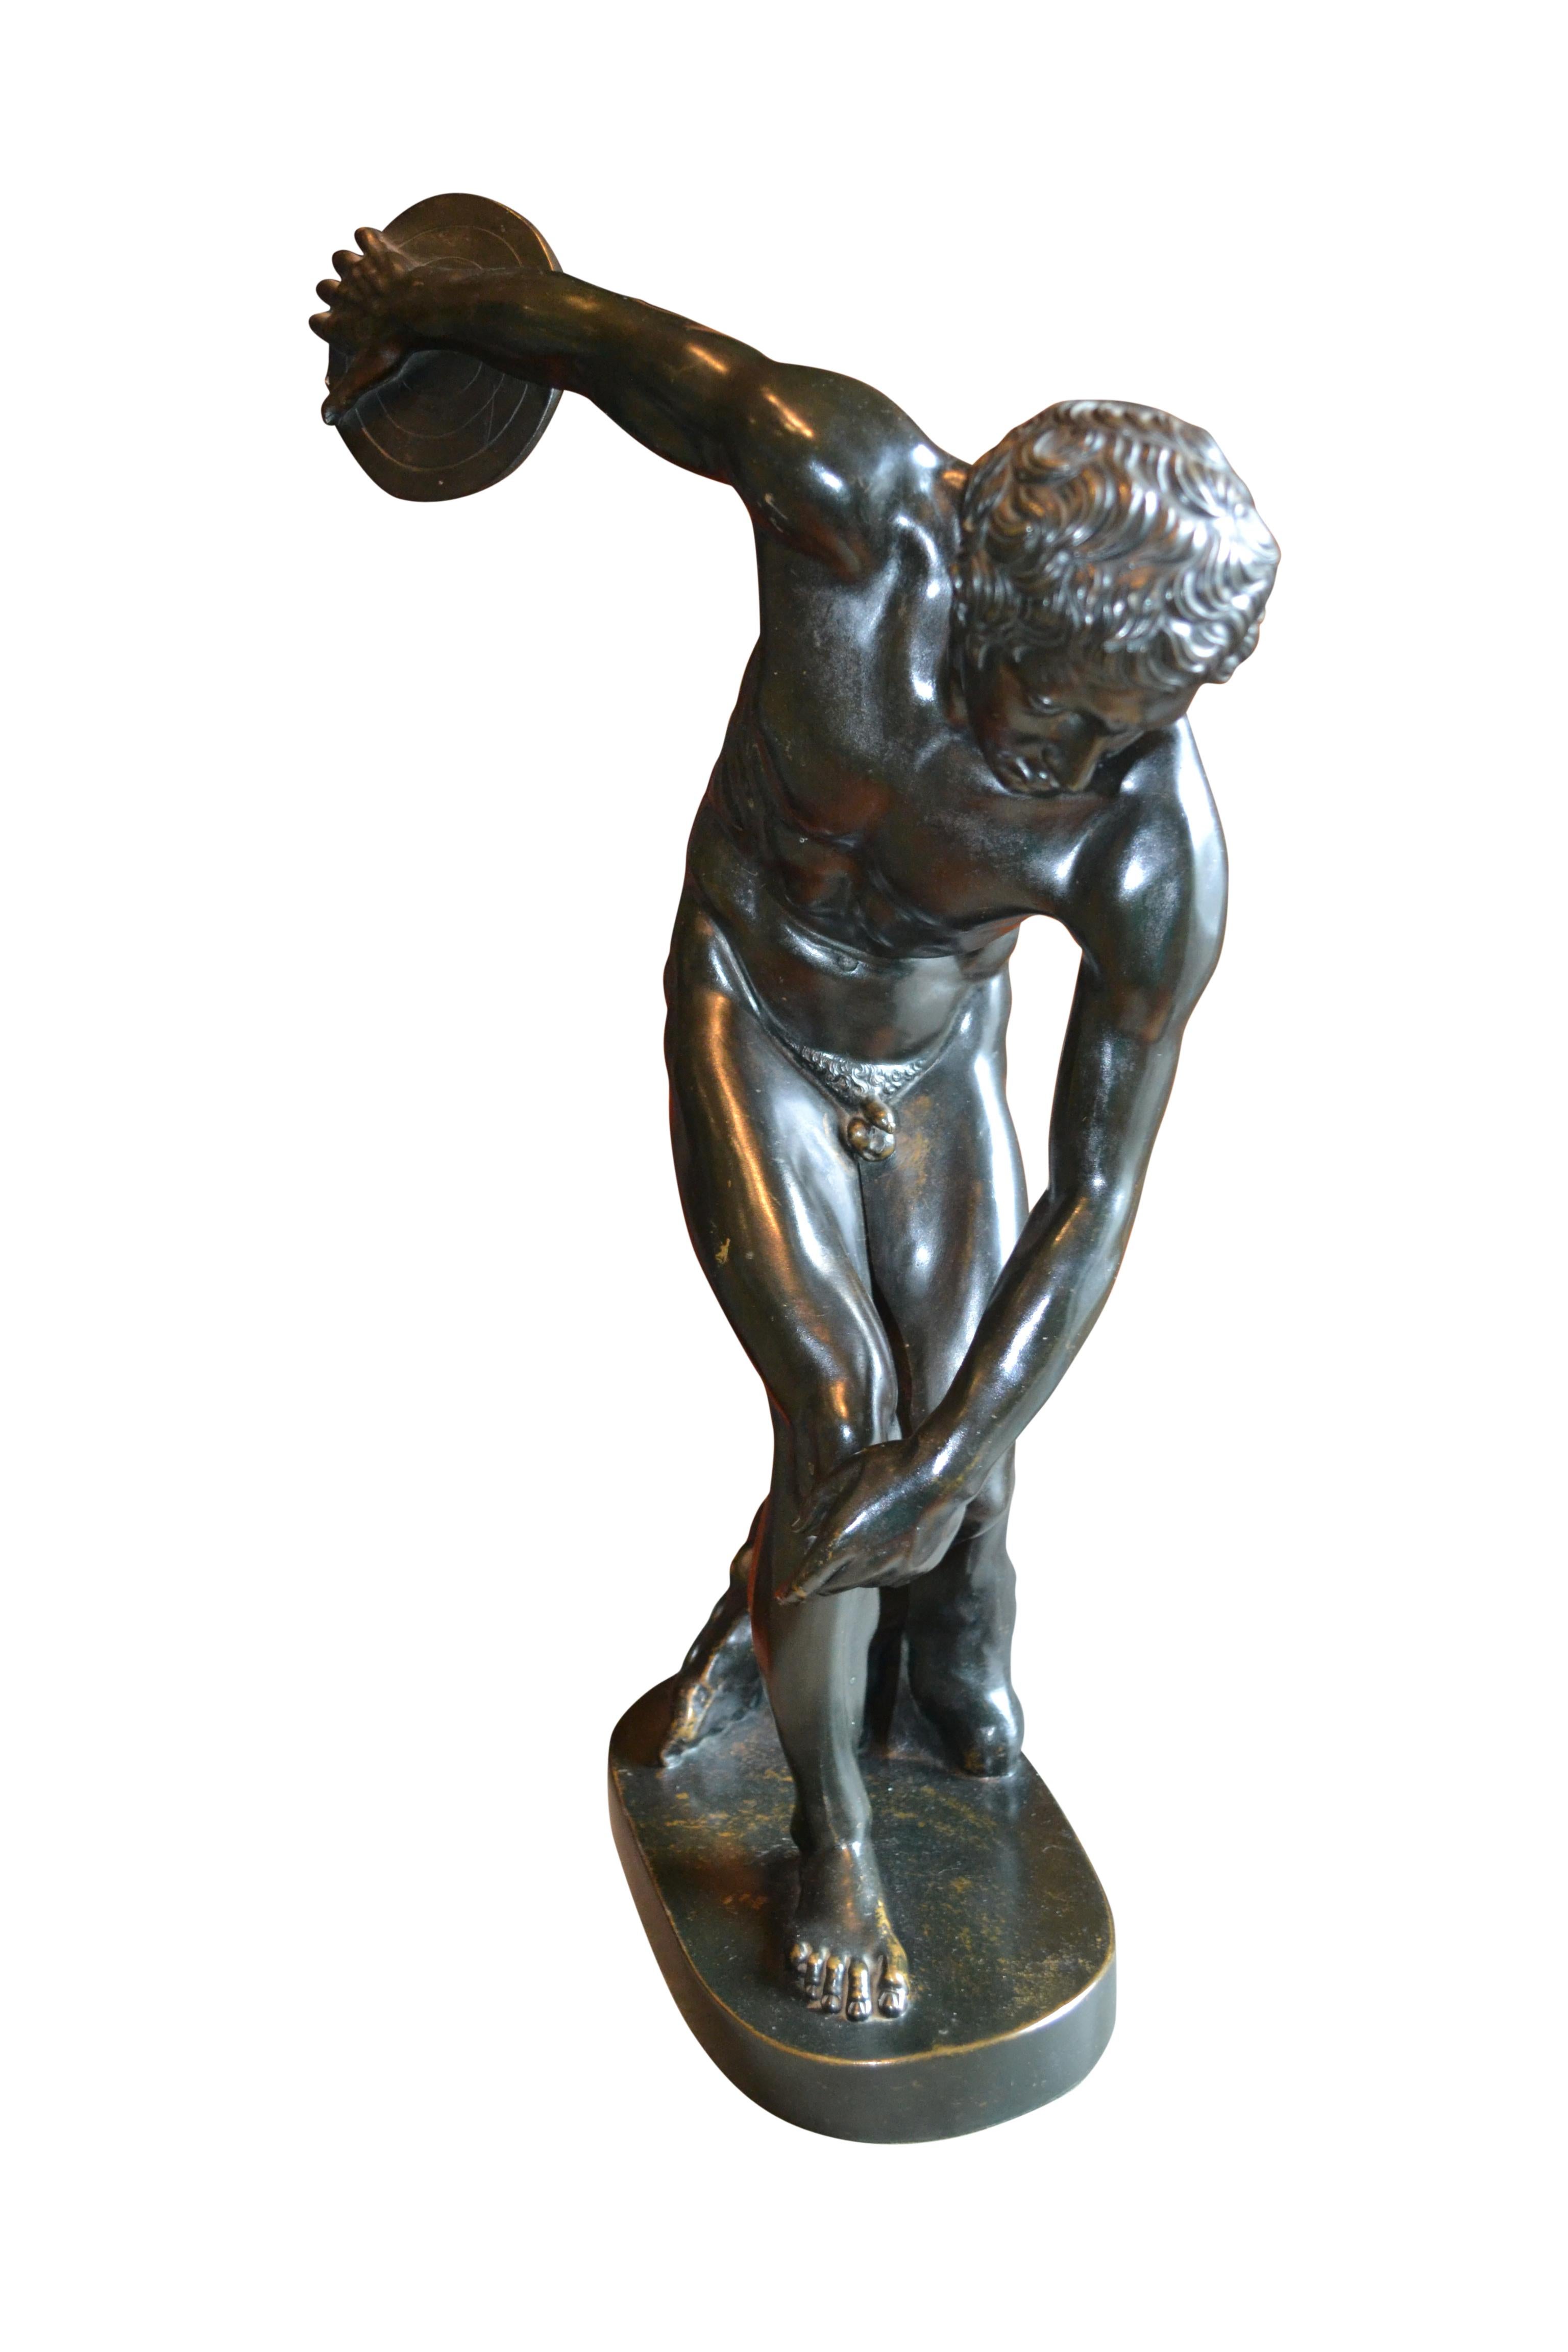 19th Century Bronze Statue of a Discus Thrower Known as the Discobolus of Myron